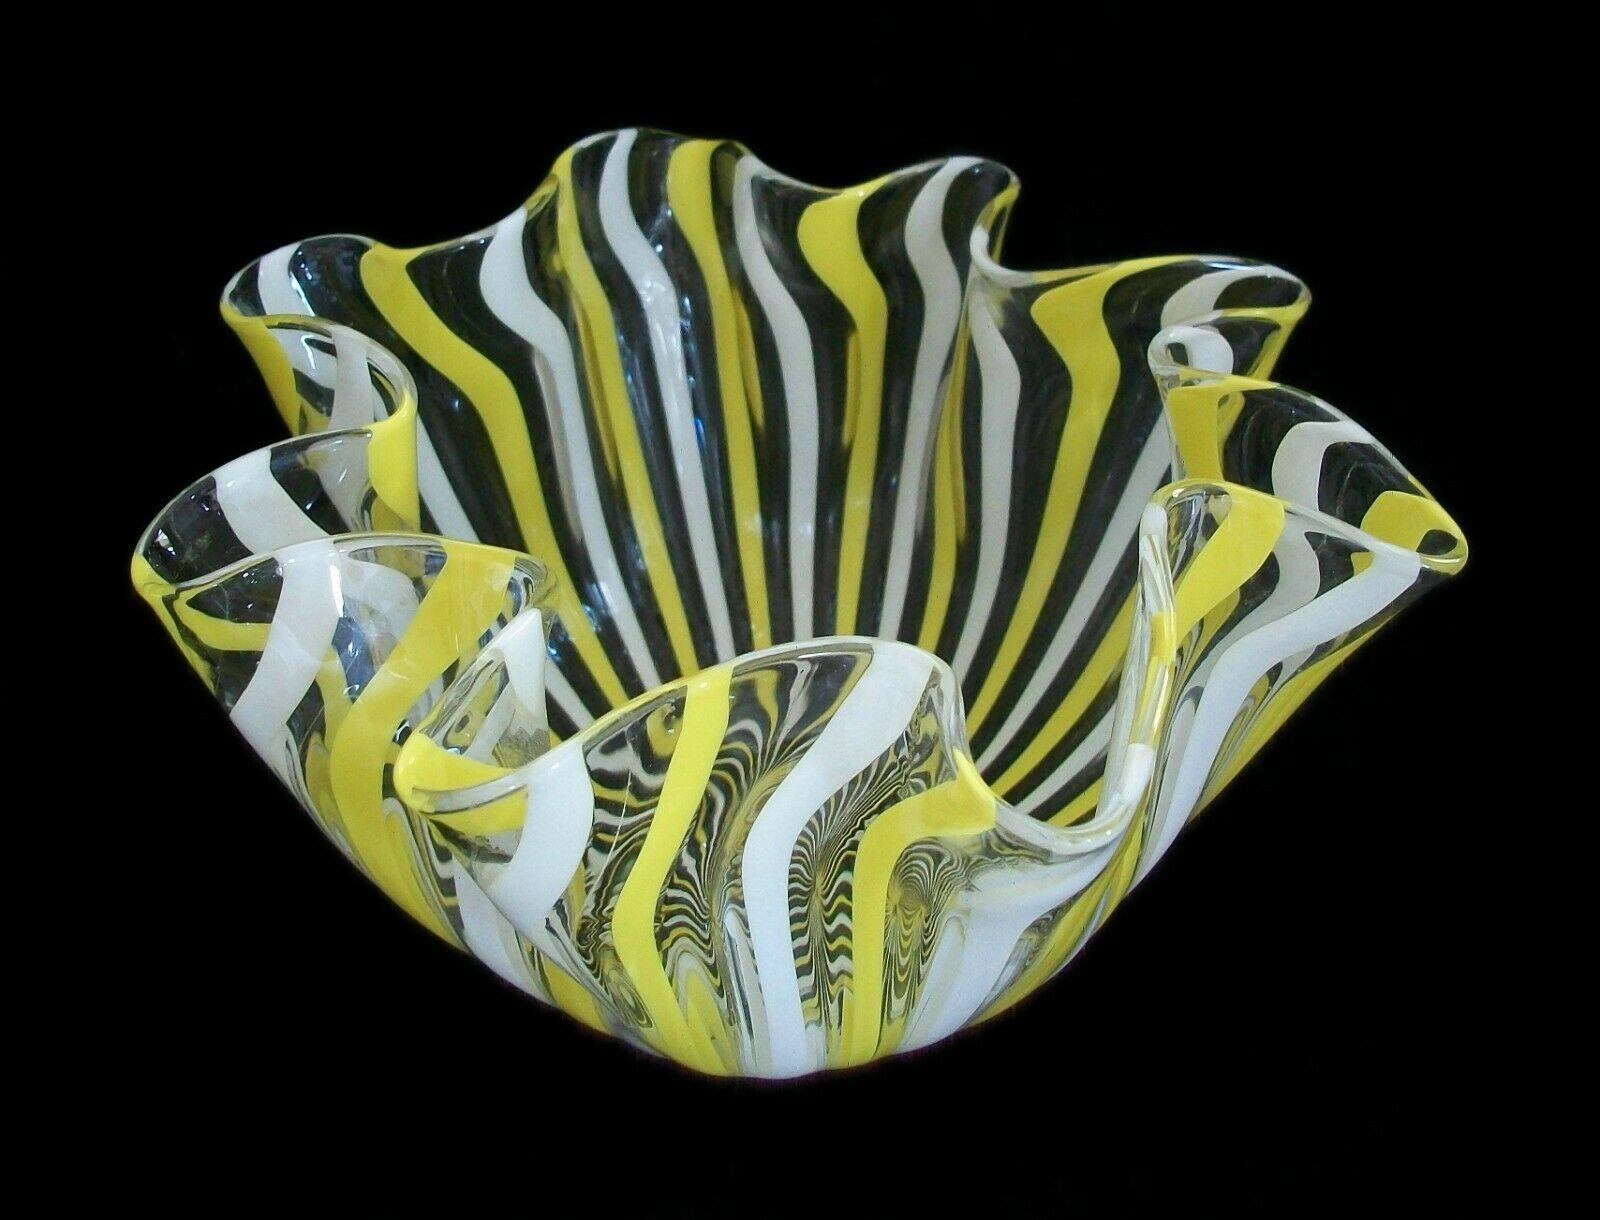 VENINI - mid century Murano Fazzoletto Filigrana glass vase - yellow, white and clear canes - rare large size - smooth polished ground pontil mark to the base - unsigned - Italy - circa 1960's.

Excellent/near mint vintage condition - scratches to